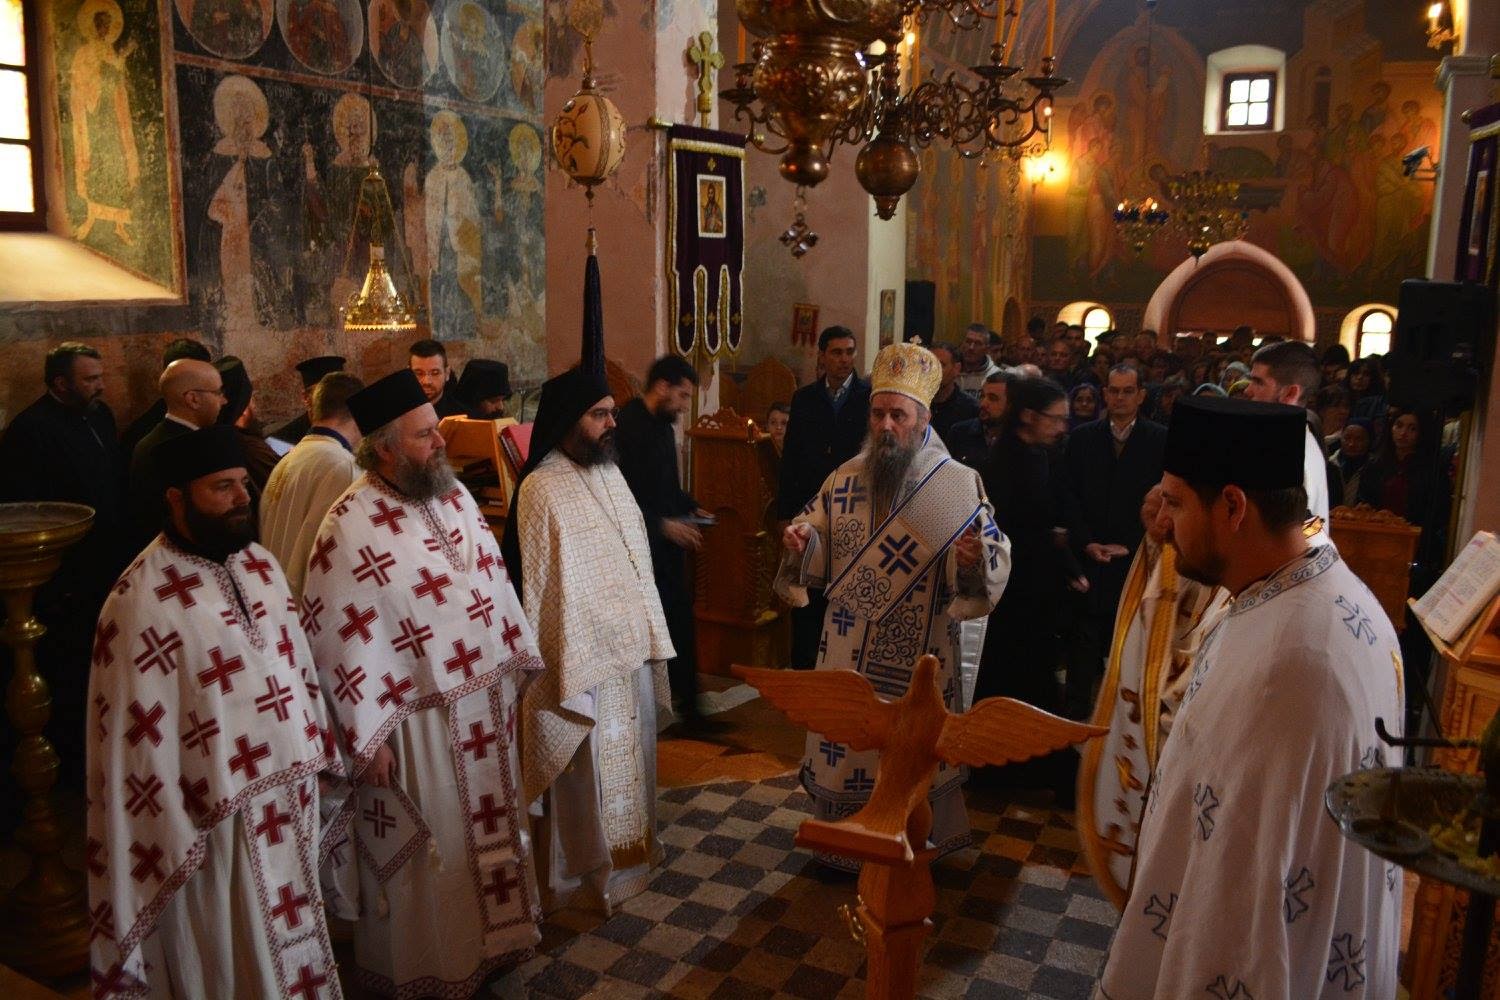 Beginning of celebrations of the 700th anniversary of Monastery Krupa